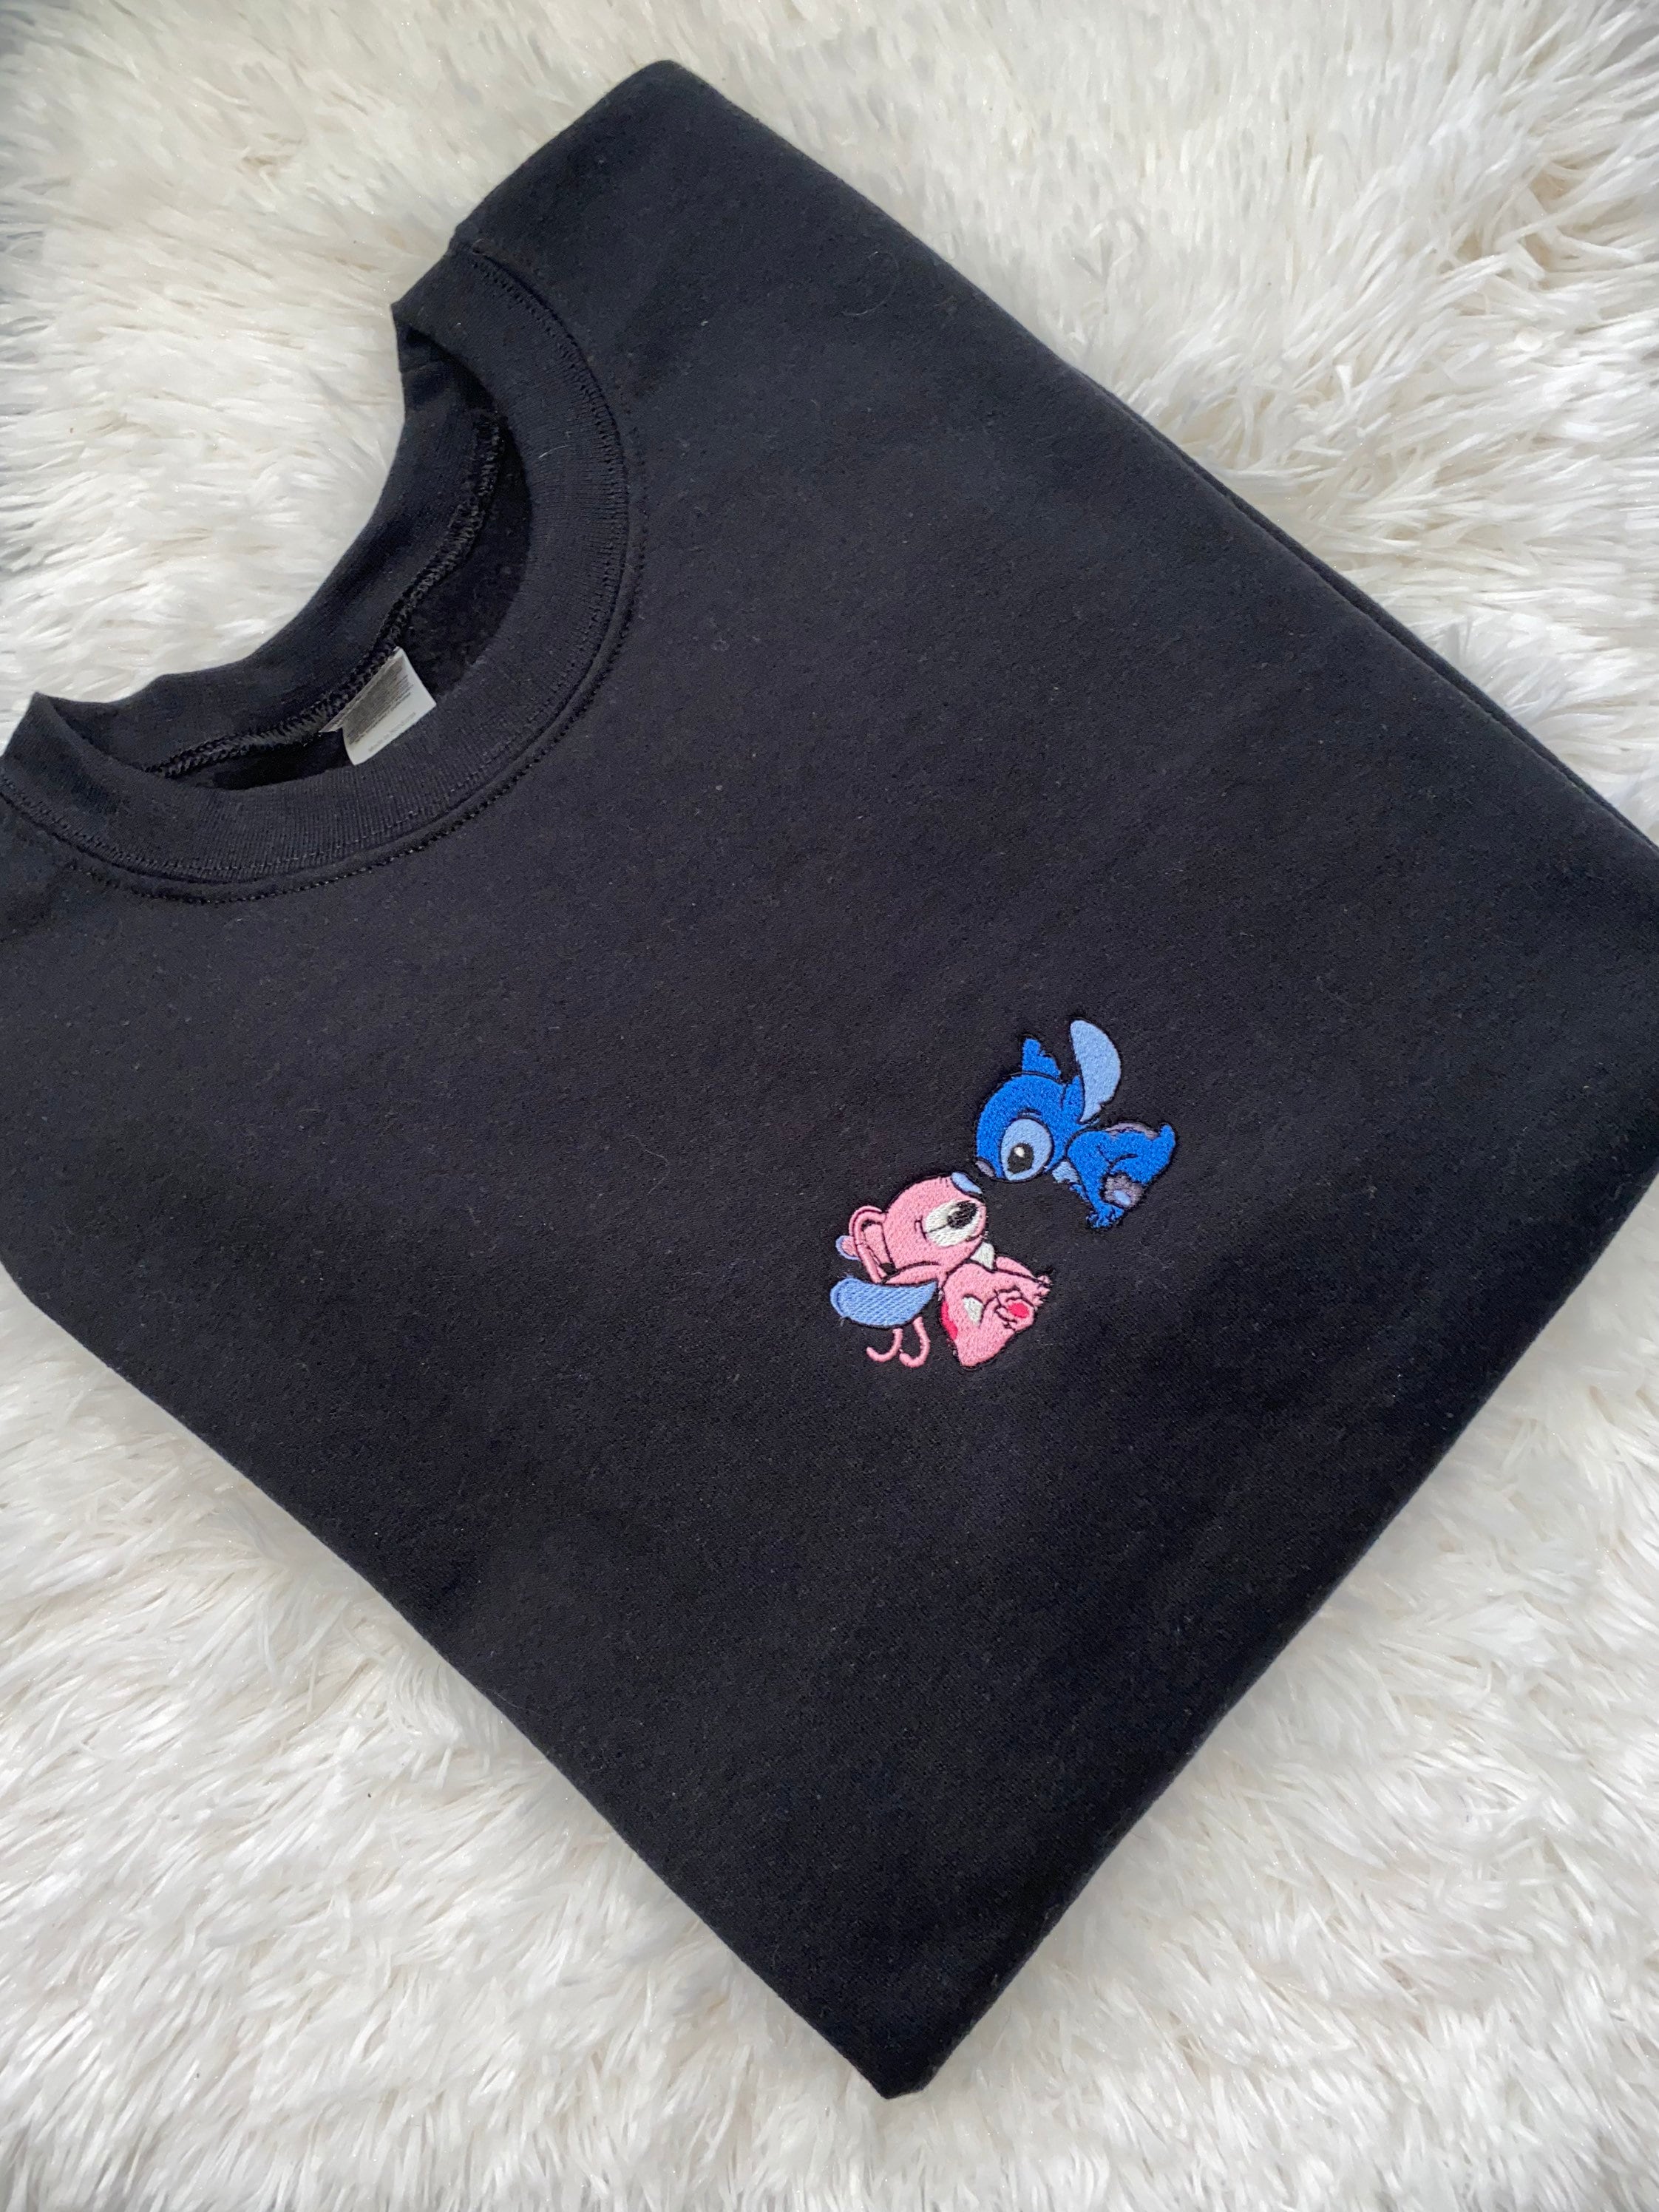 Stitch and Angel embroidered sweatshirt, embroidered crewneck